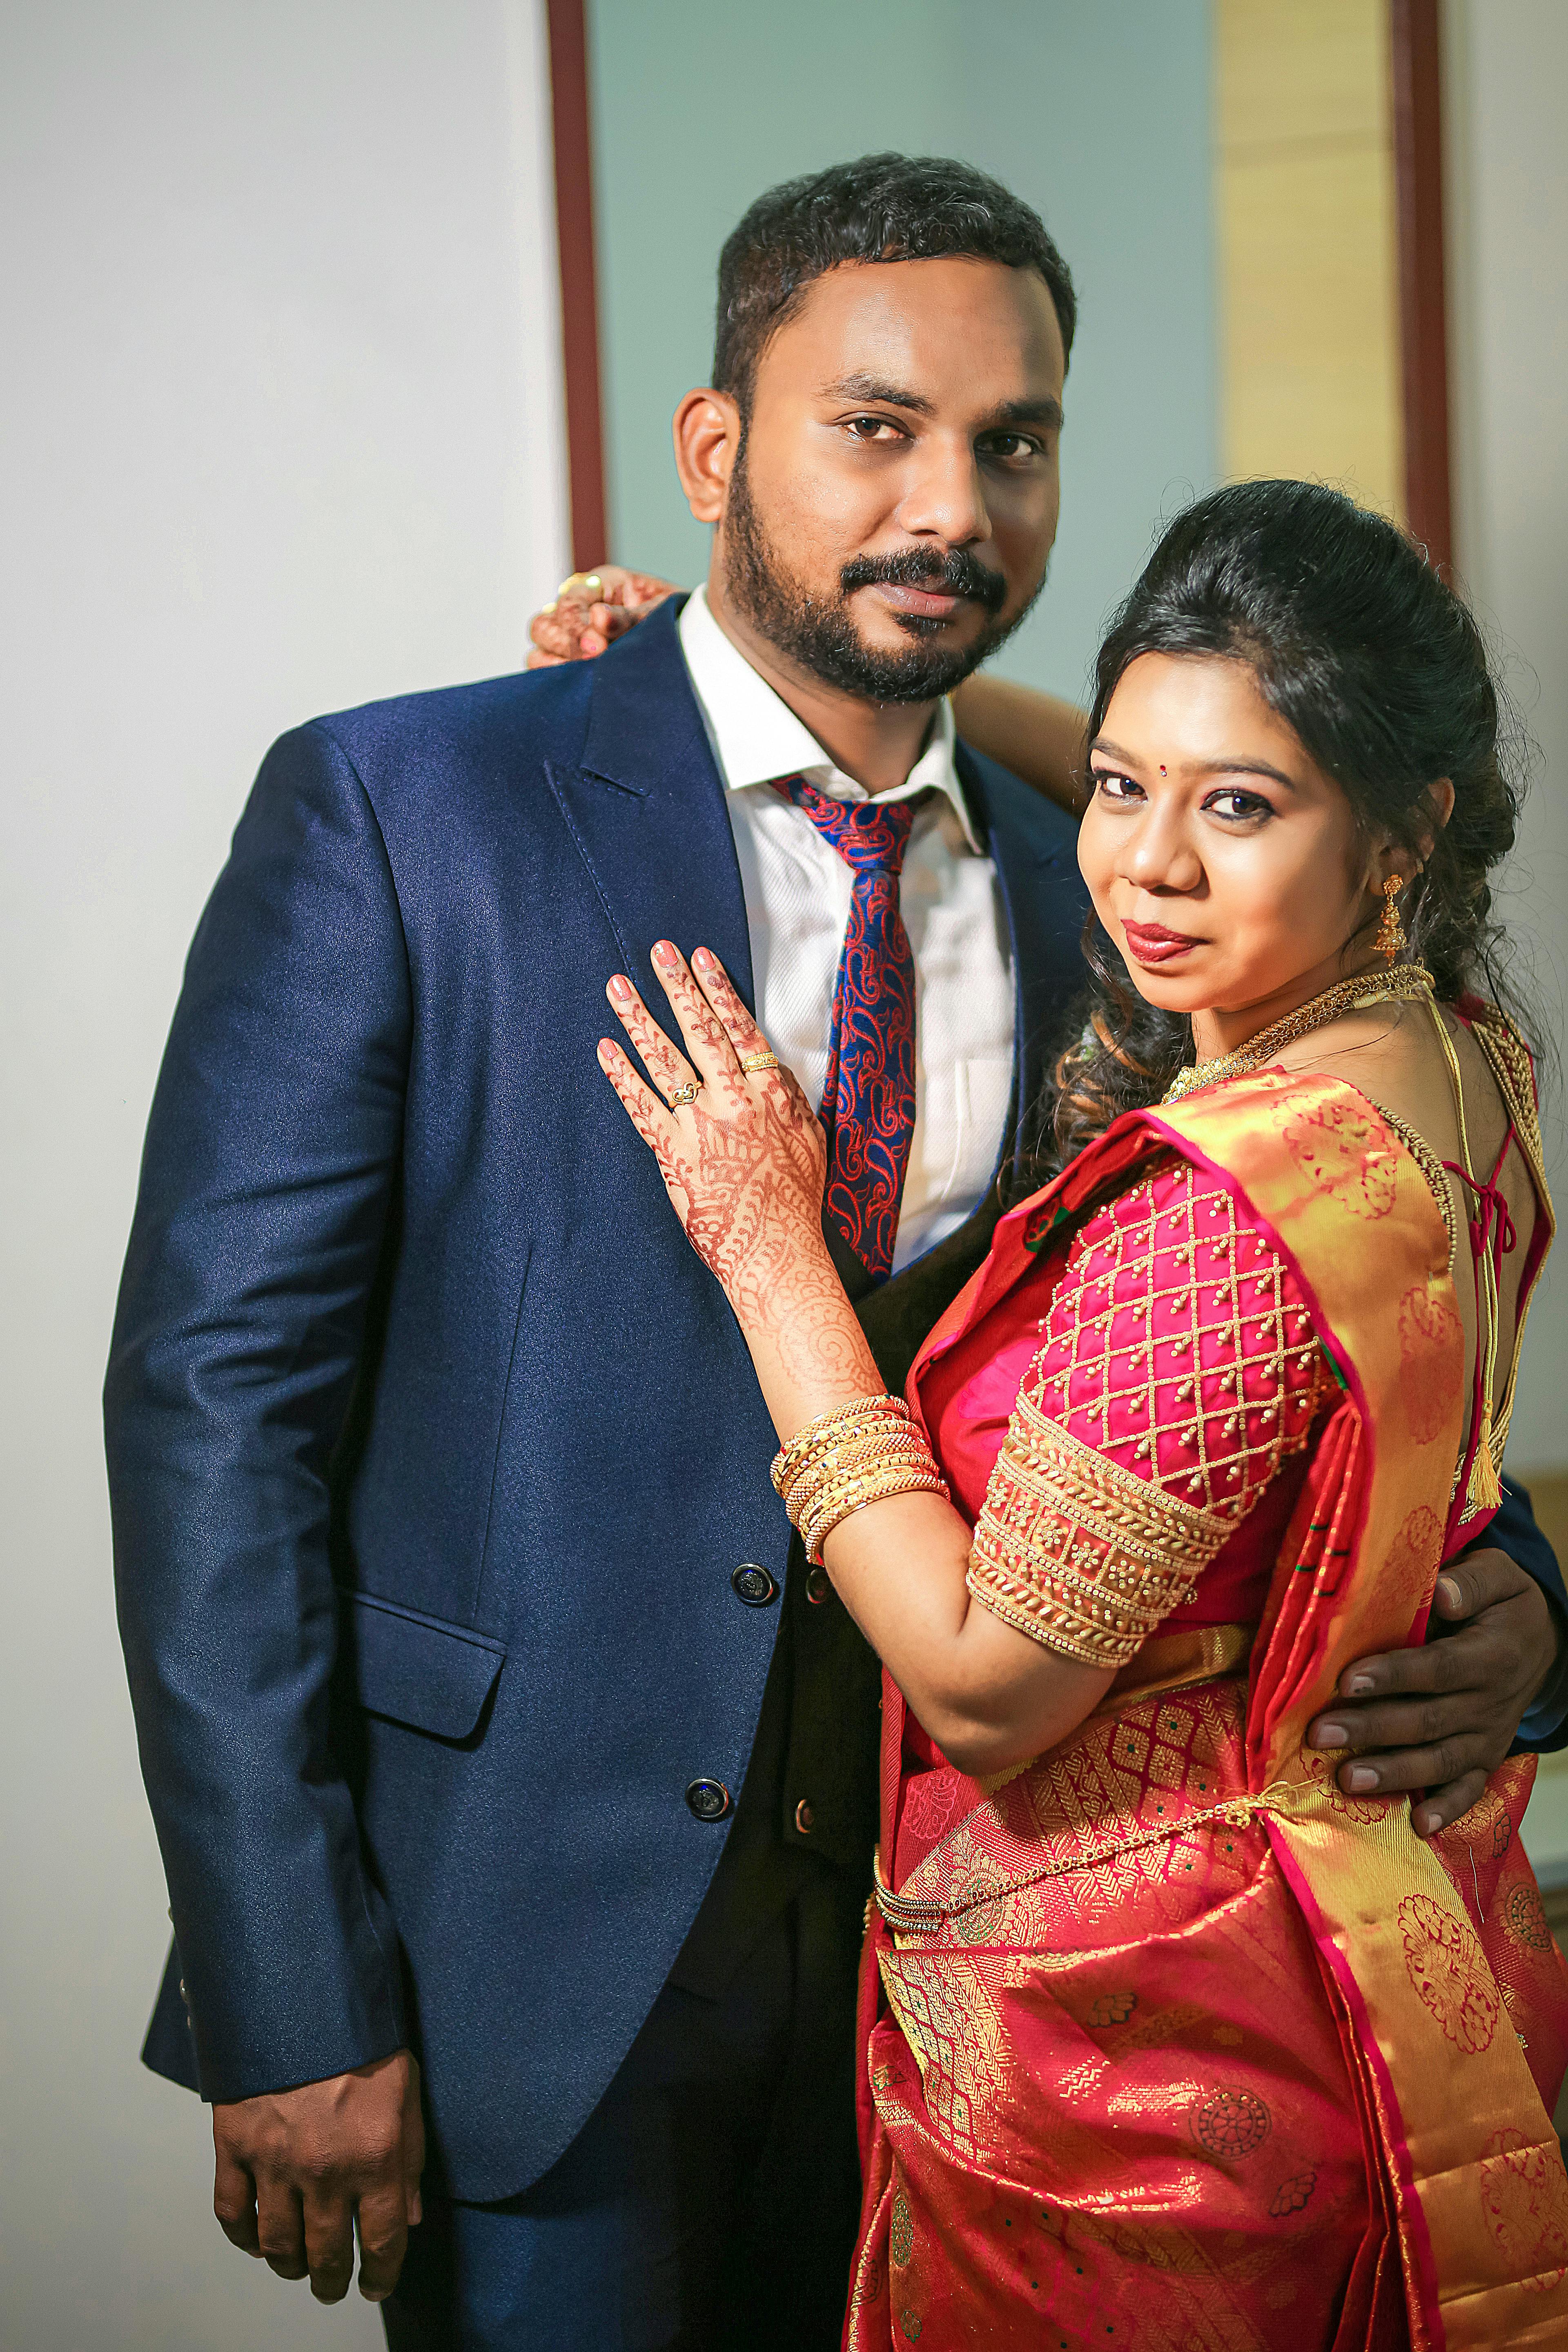 Tamil Hindu couple poses for a photo after just being married at the...  News Photo - Getty Images